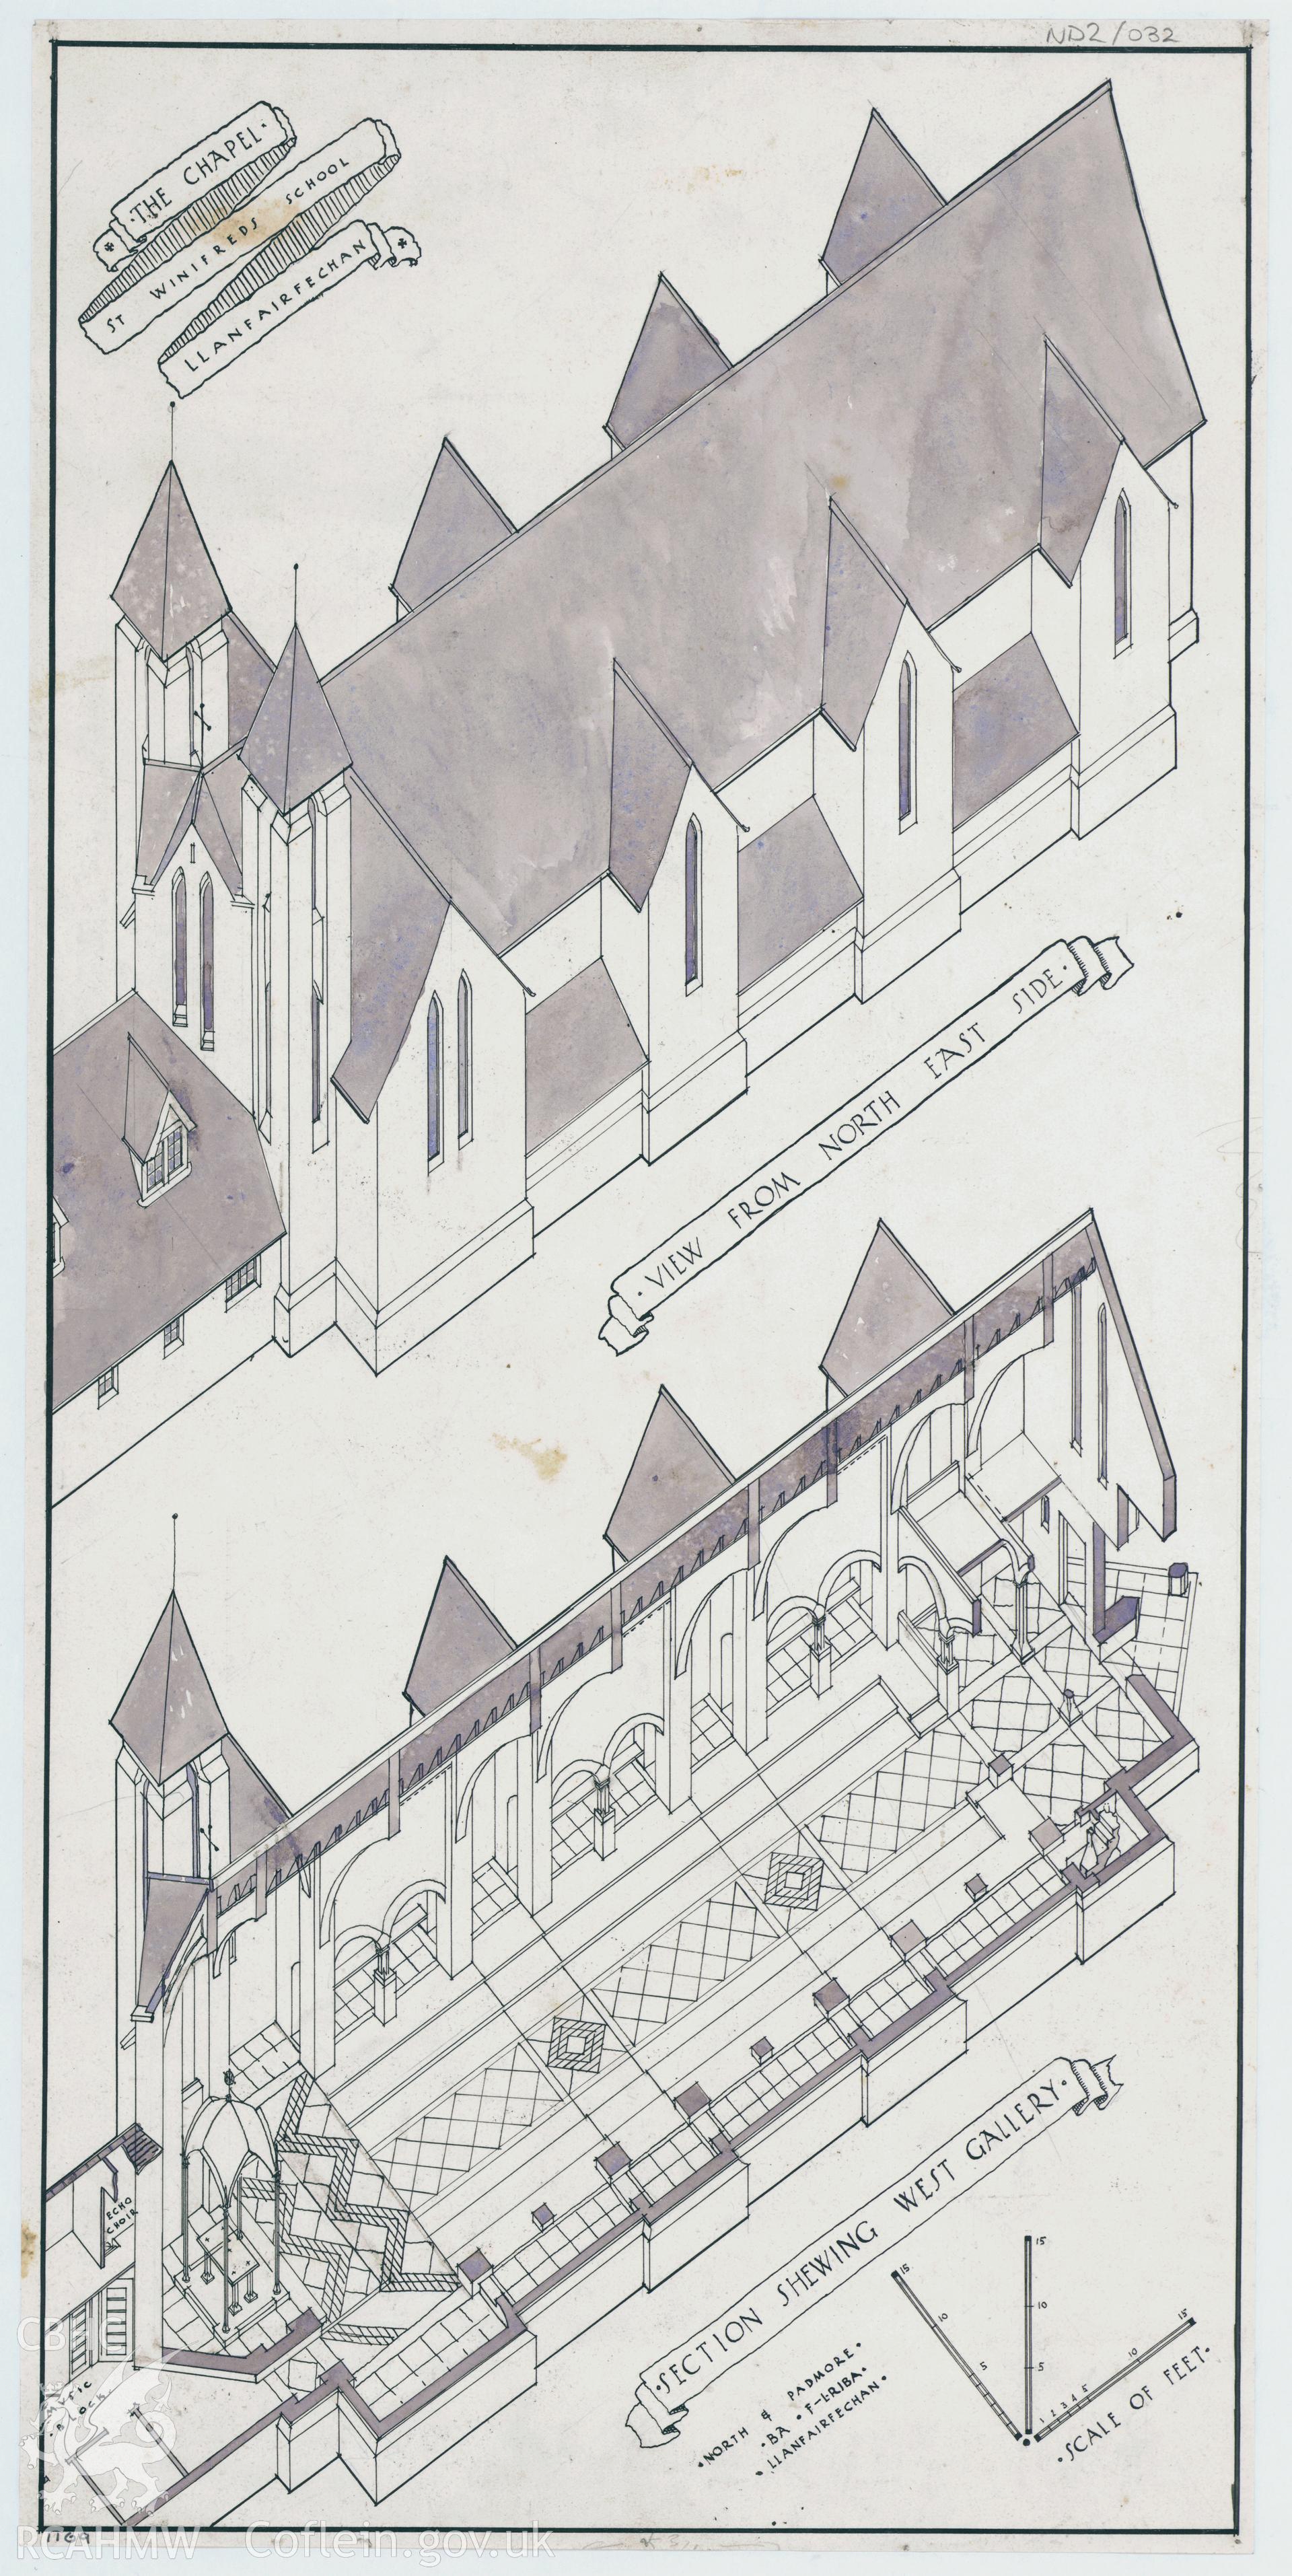 Isometric drawings of St Winifred's School chapel, showing a view from the north east side and a section of the west gallery, scale seven and a half feet to the inch, ink and grey wash on paper.